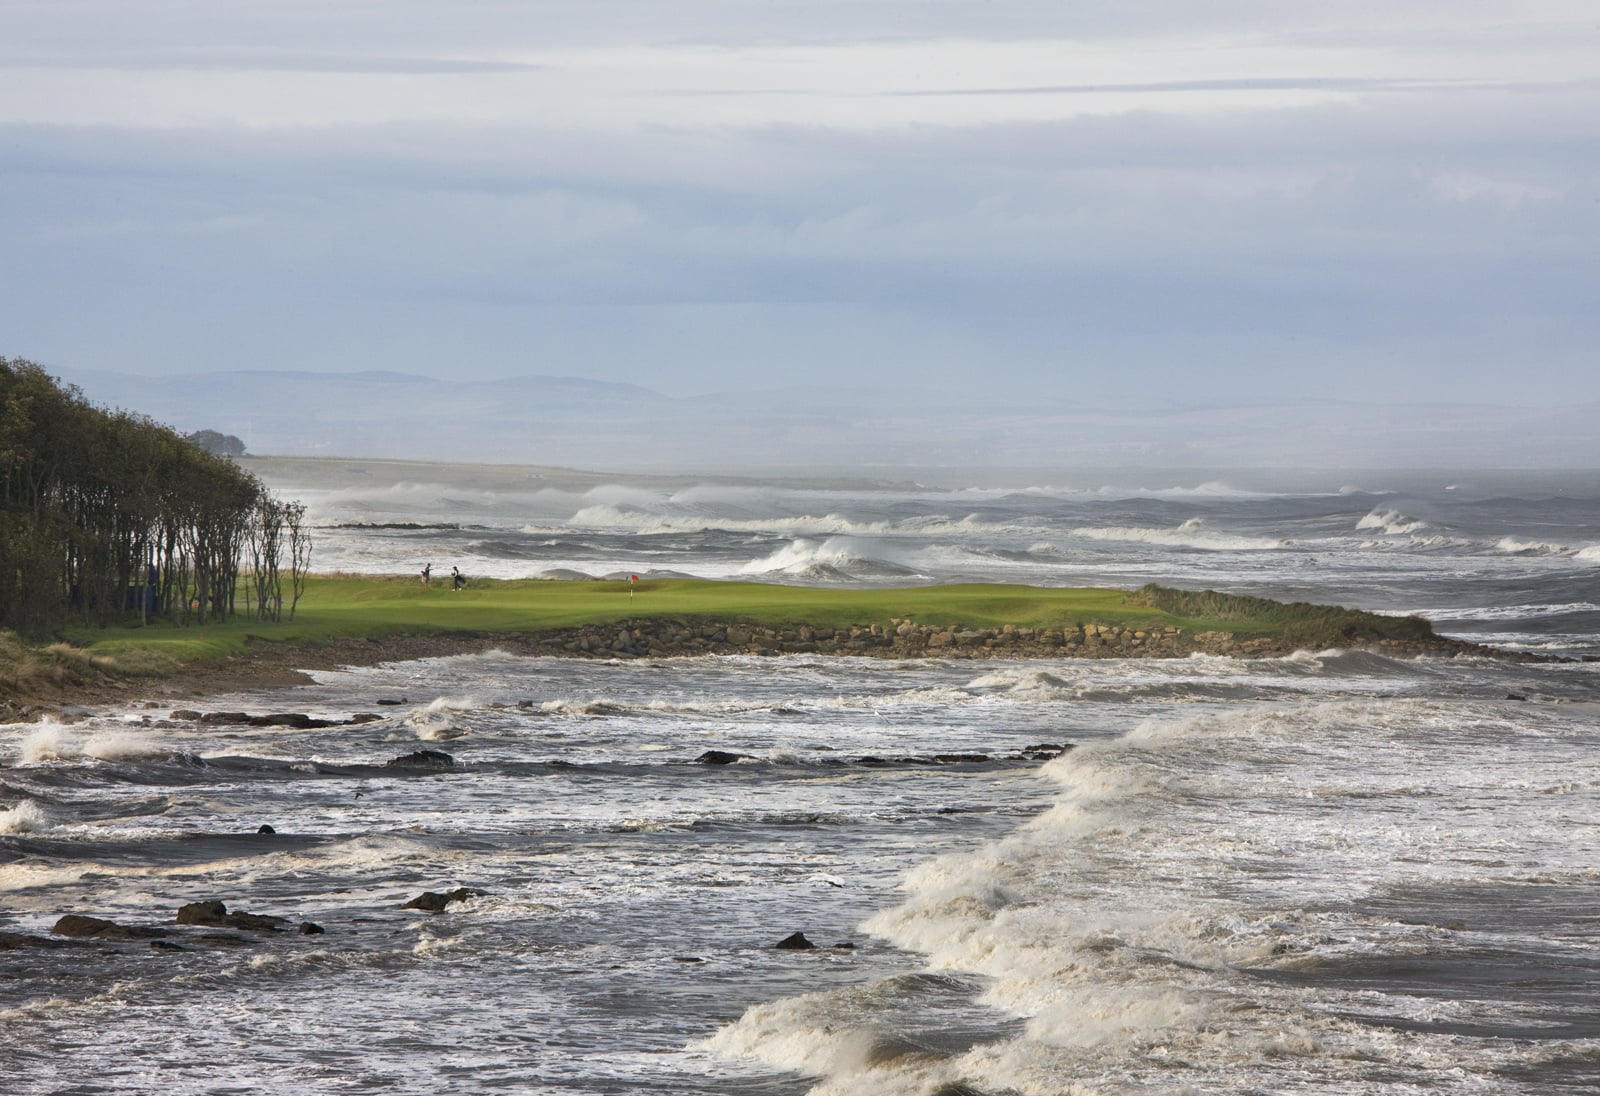 The rough seas at Kingsbarns can make a round of golf dramatic